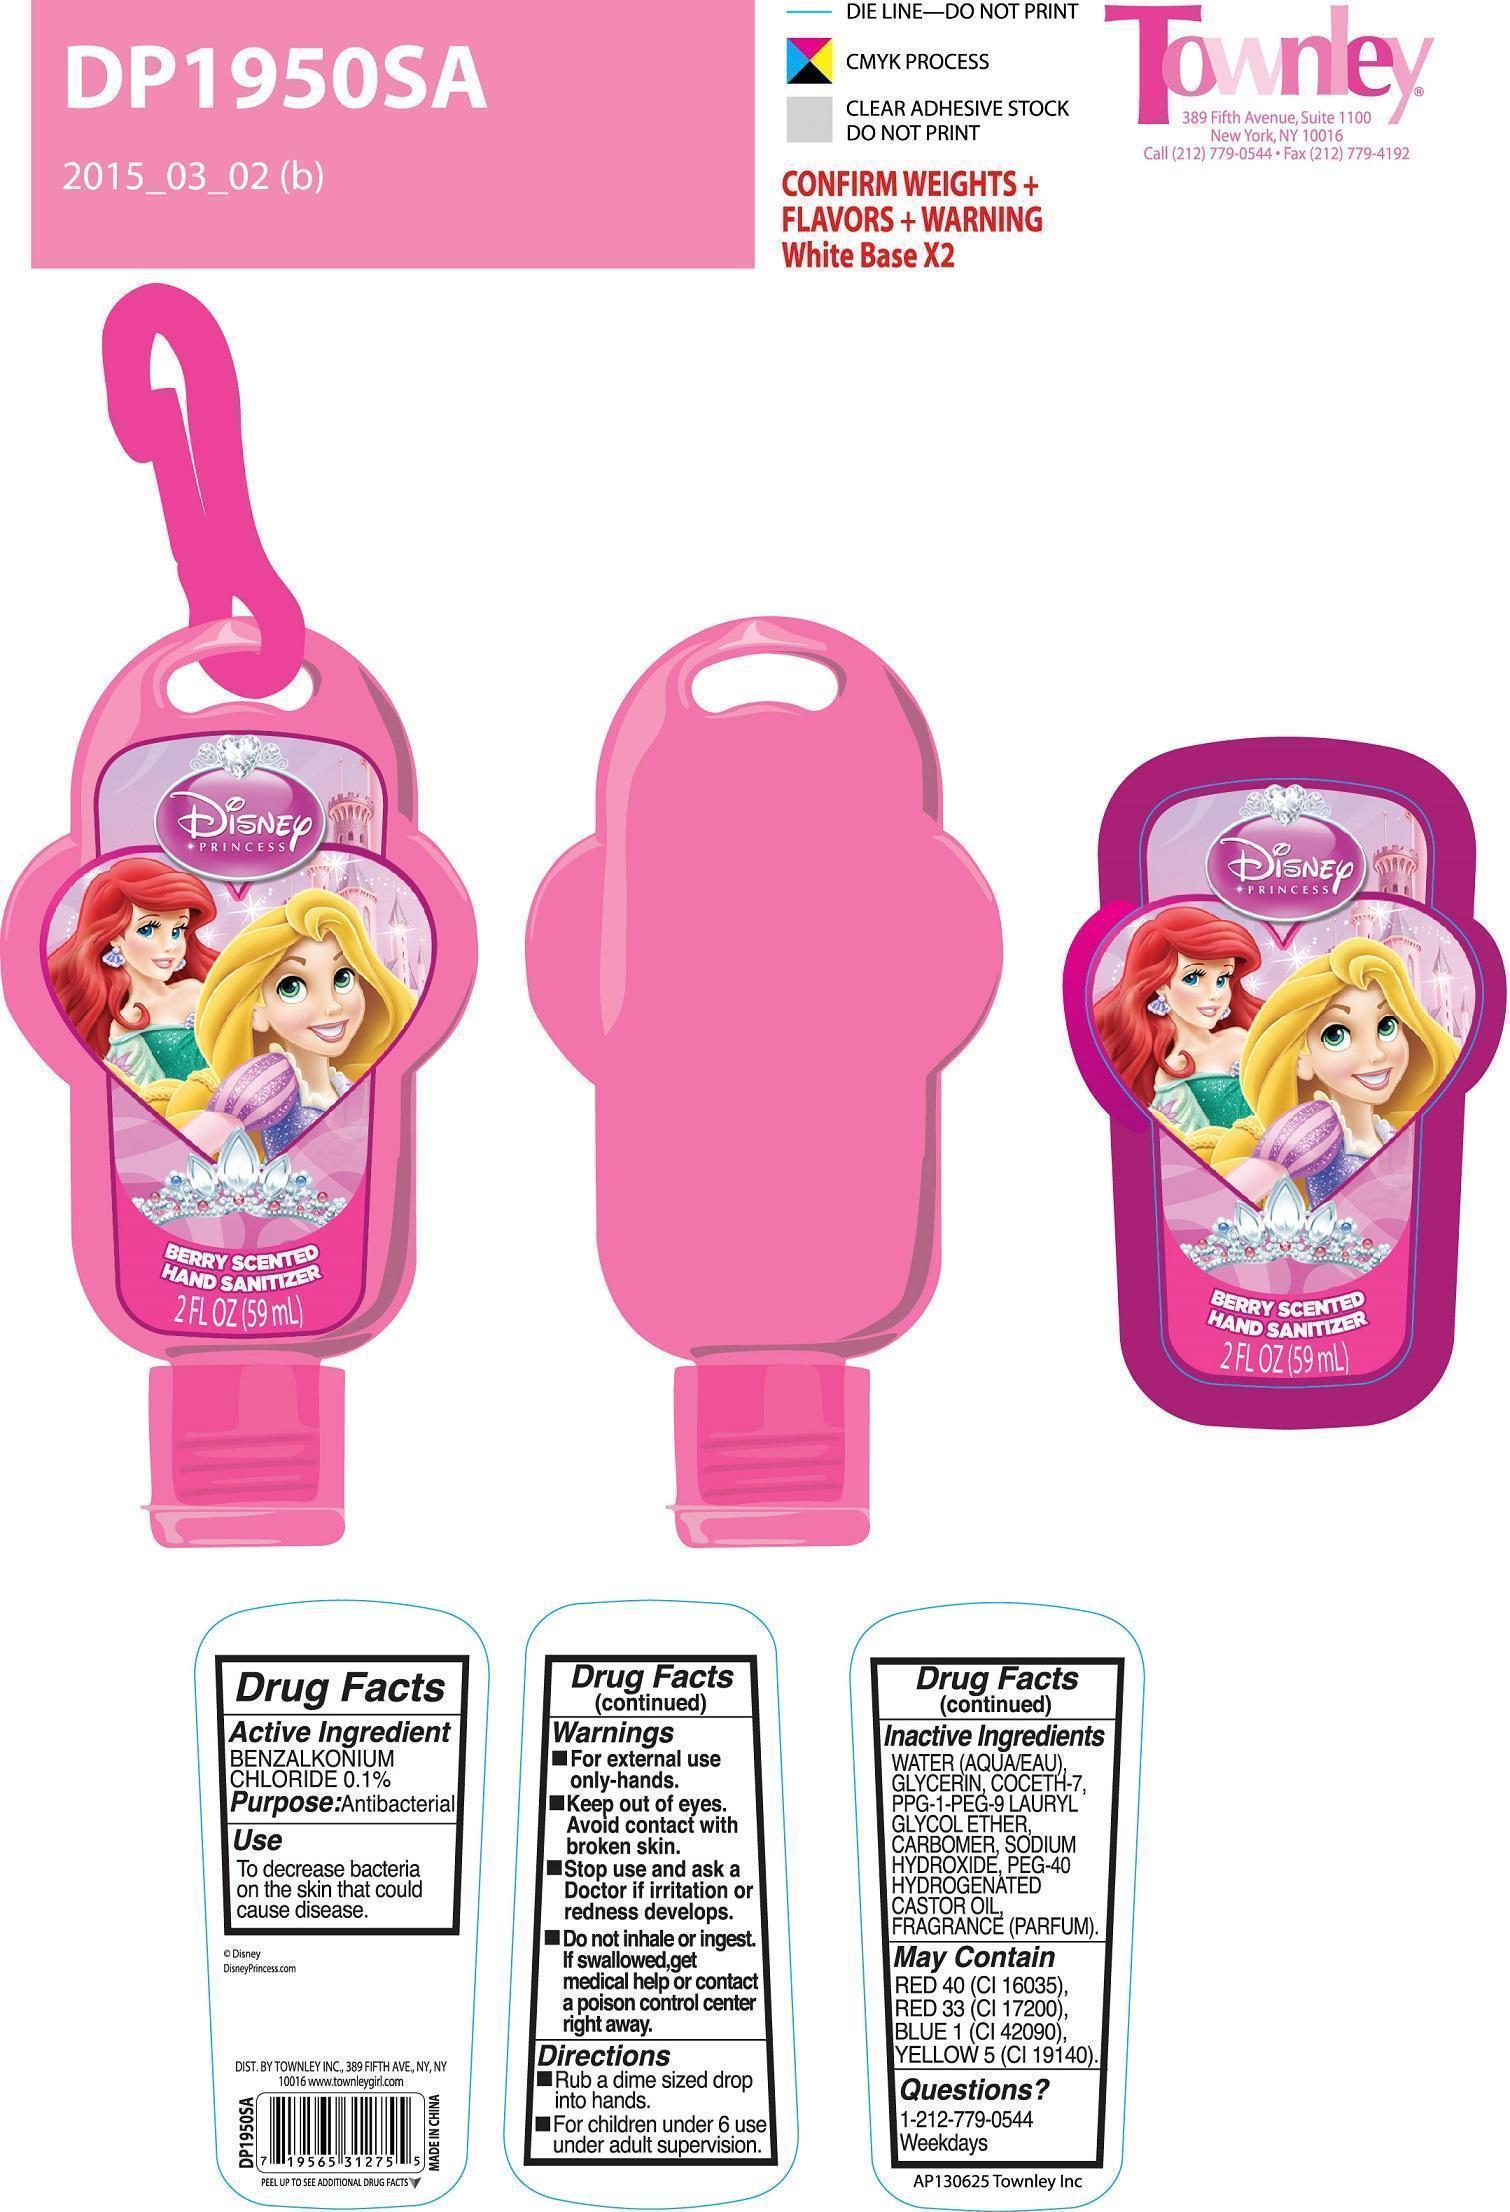 Berry Scented Hand Sanitizer Princesses | Benzalkonium Chloride Gel while Breastfeeding